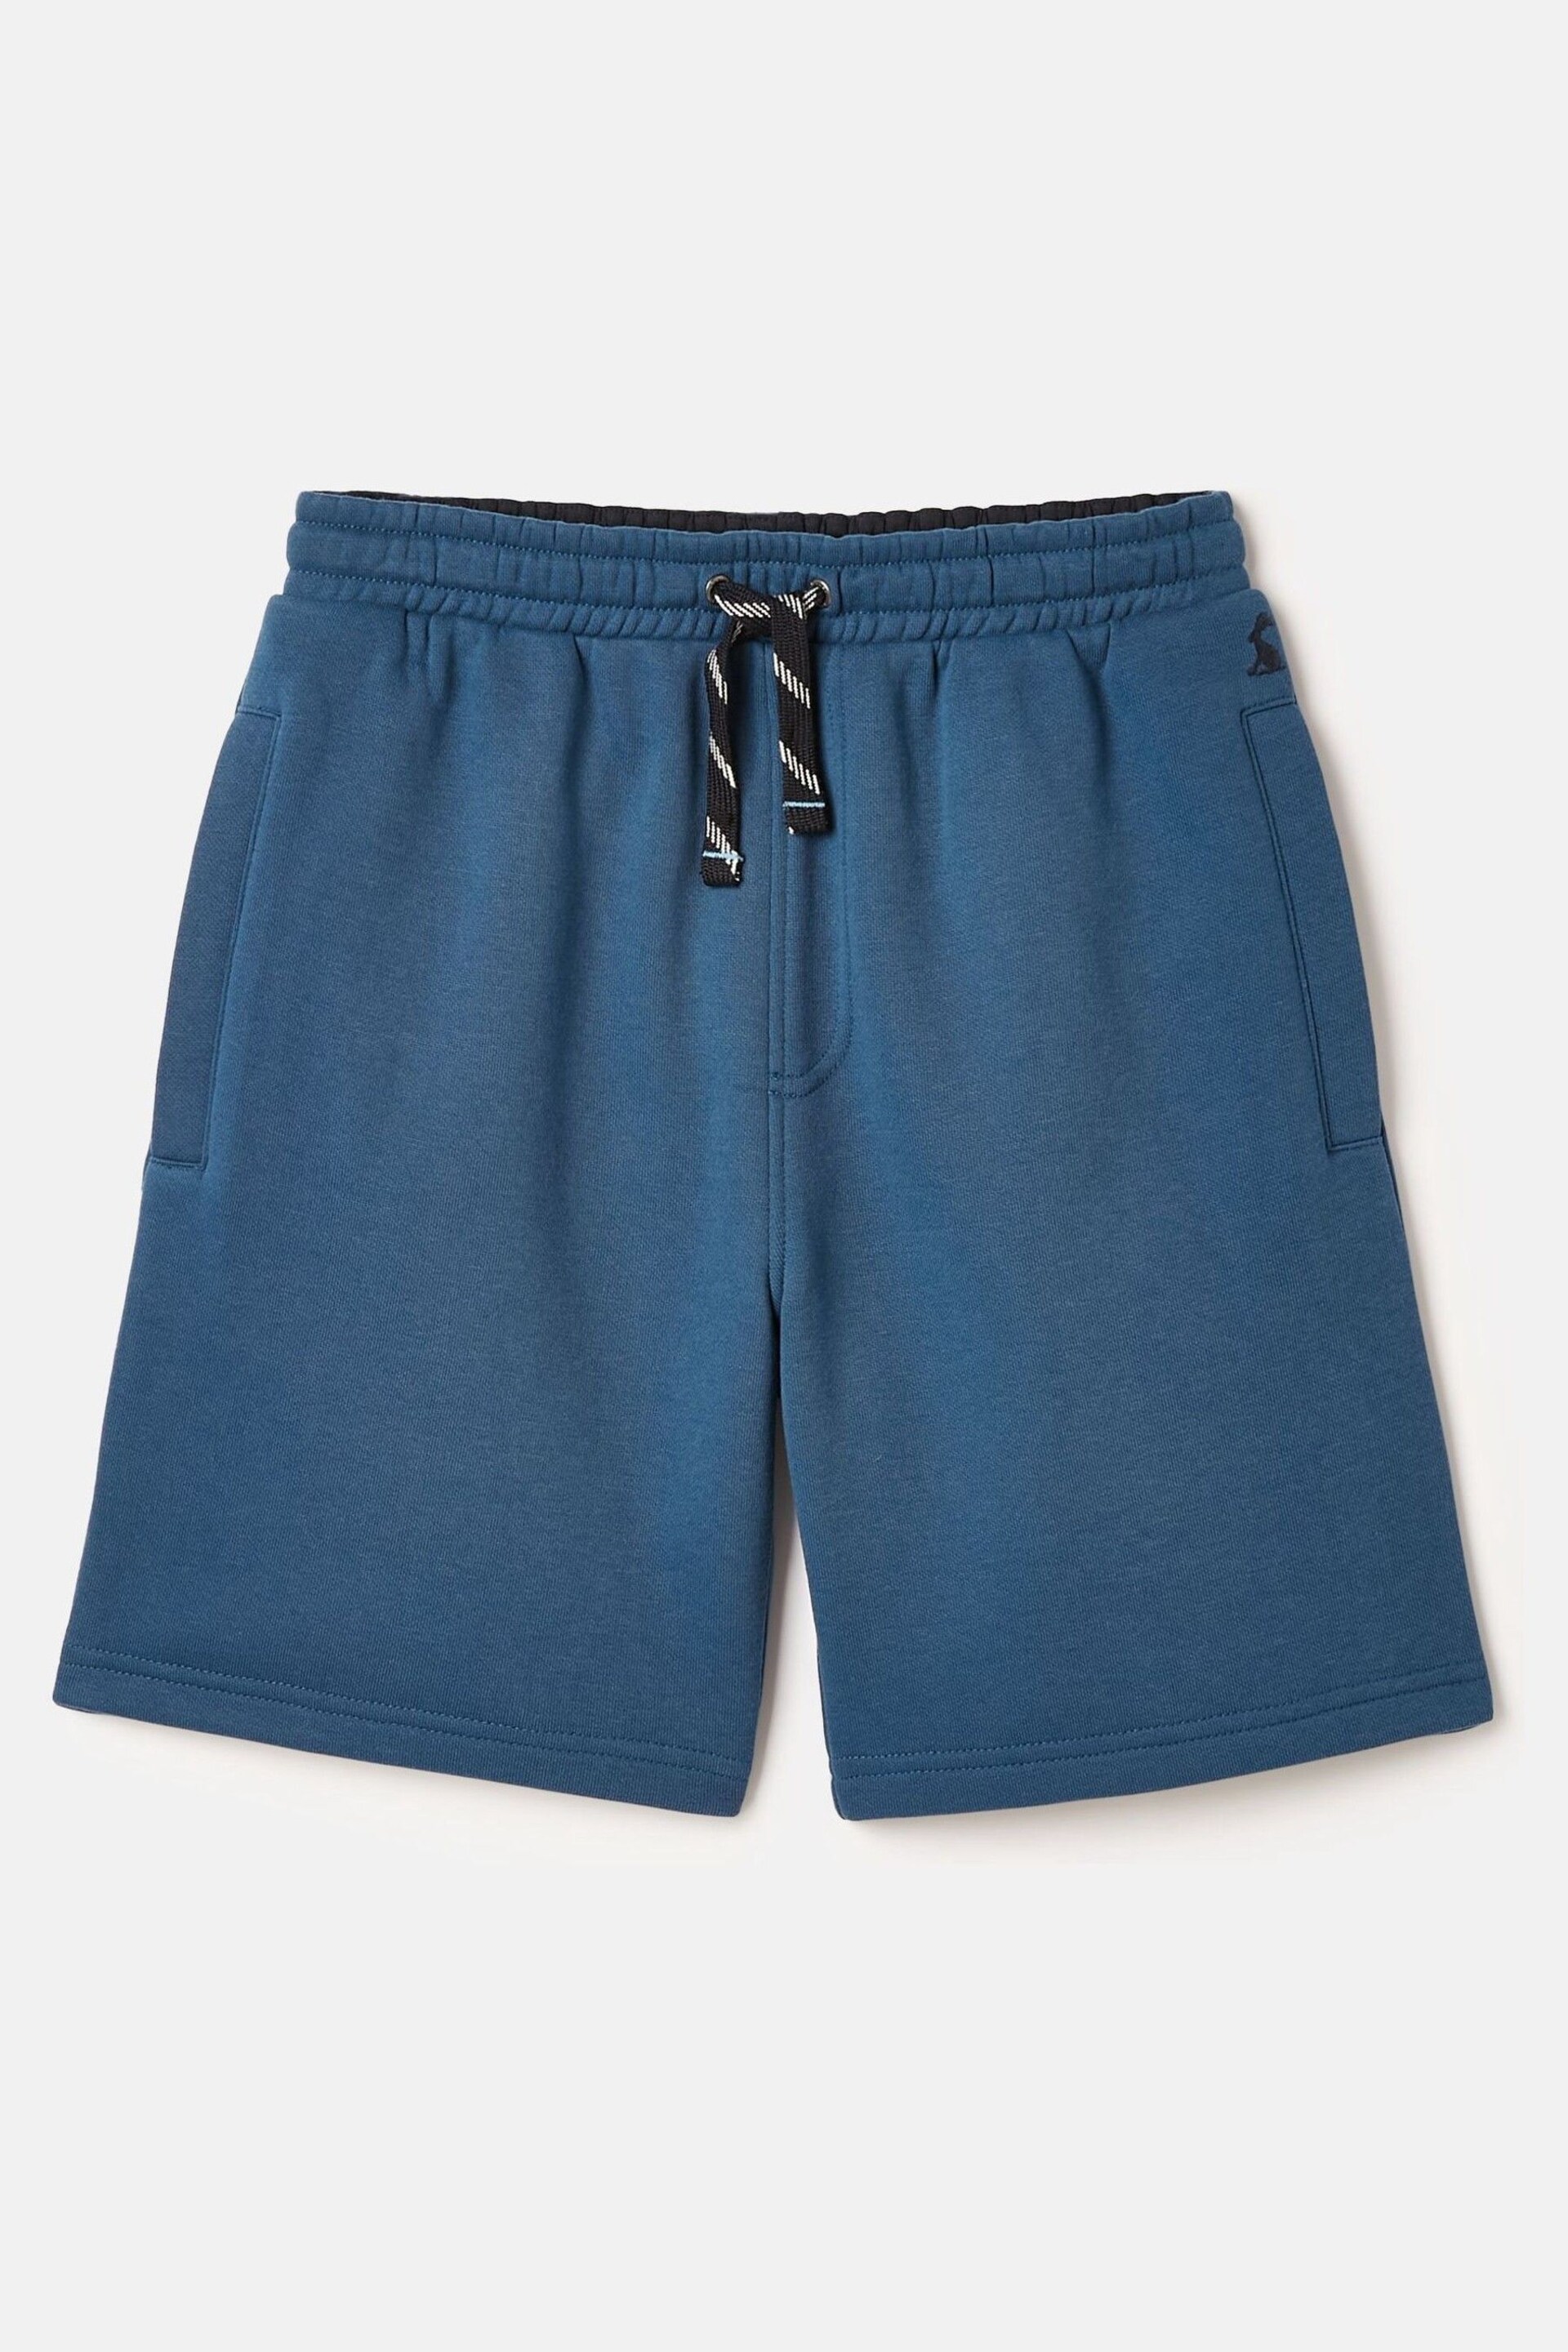 Joules Barton Blue Jersey Shorts - Image 1 of 5